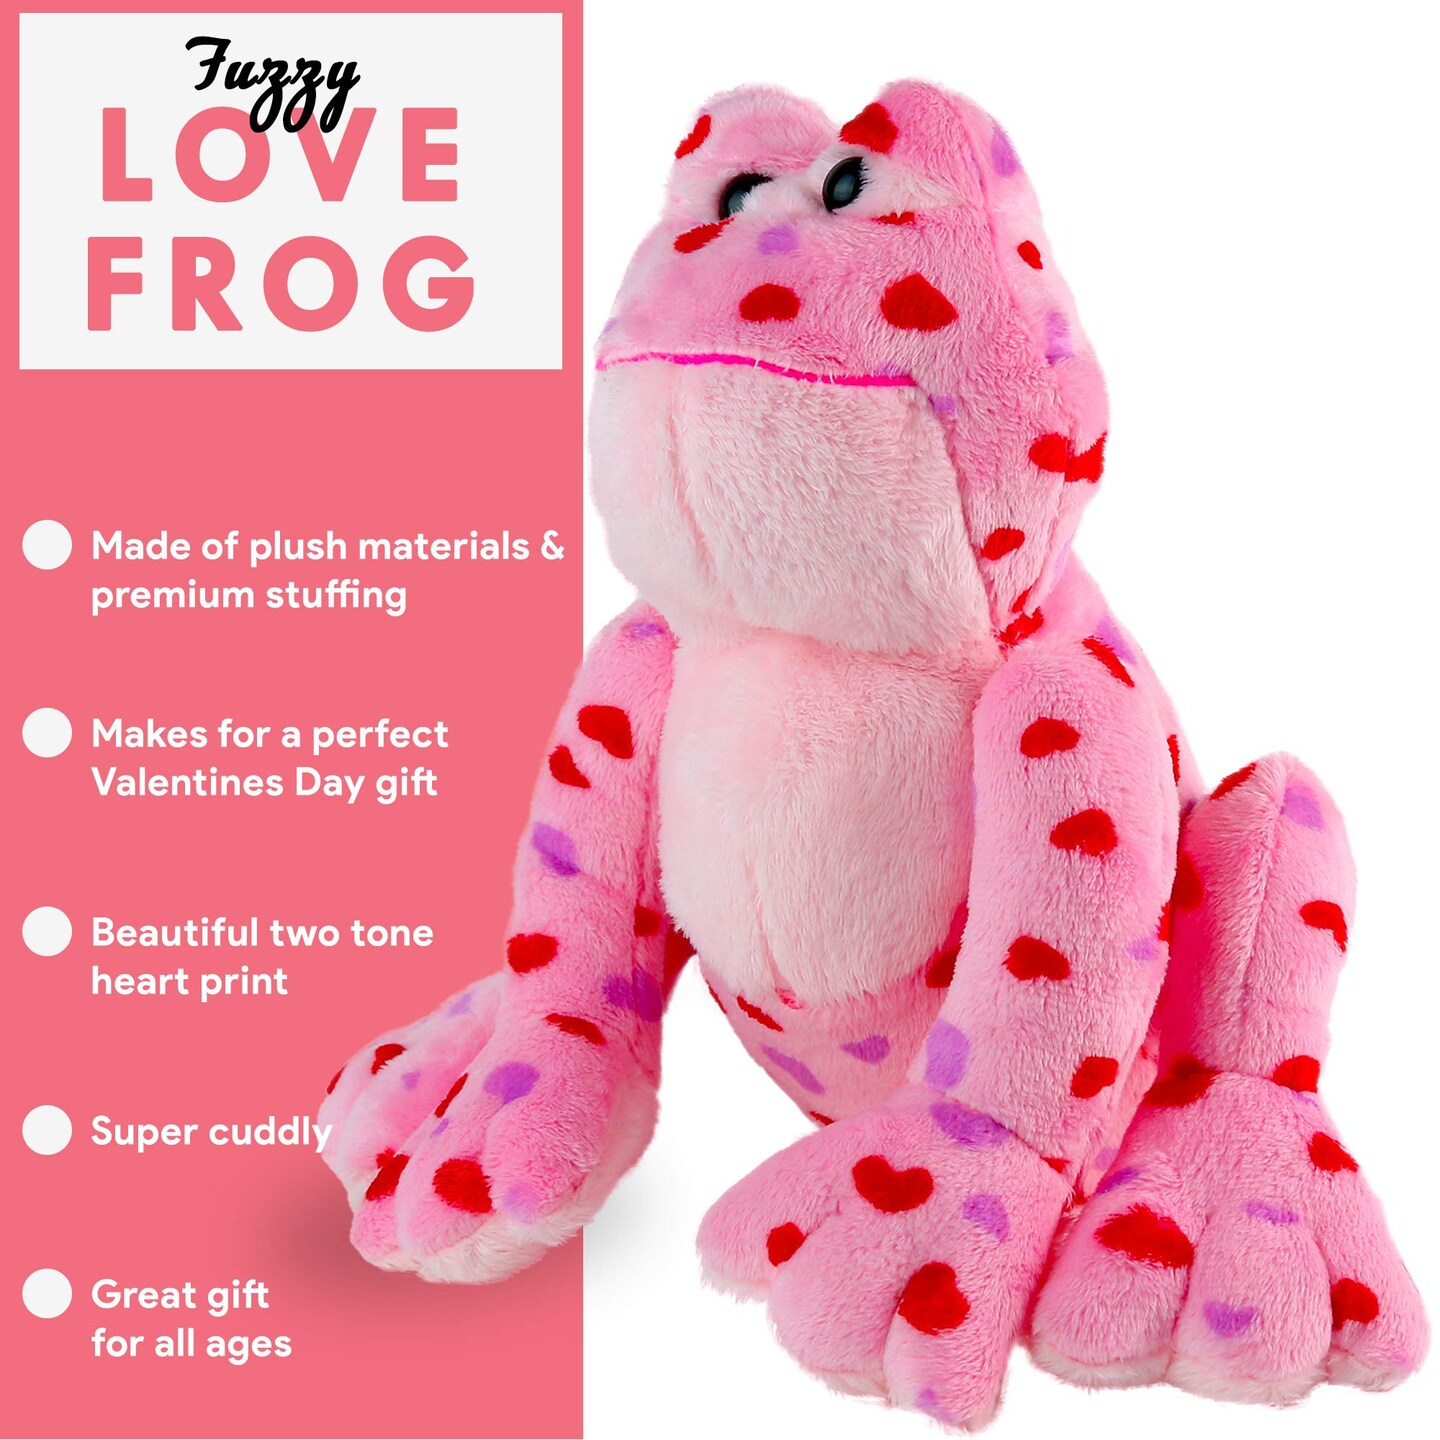 Big Mo&#x27;s Toys Love Frog - Plush Valentine&#x27;s Day Pink and Red Heart Printed Small Stuffed Frogs Animals for All Ages